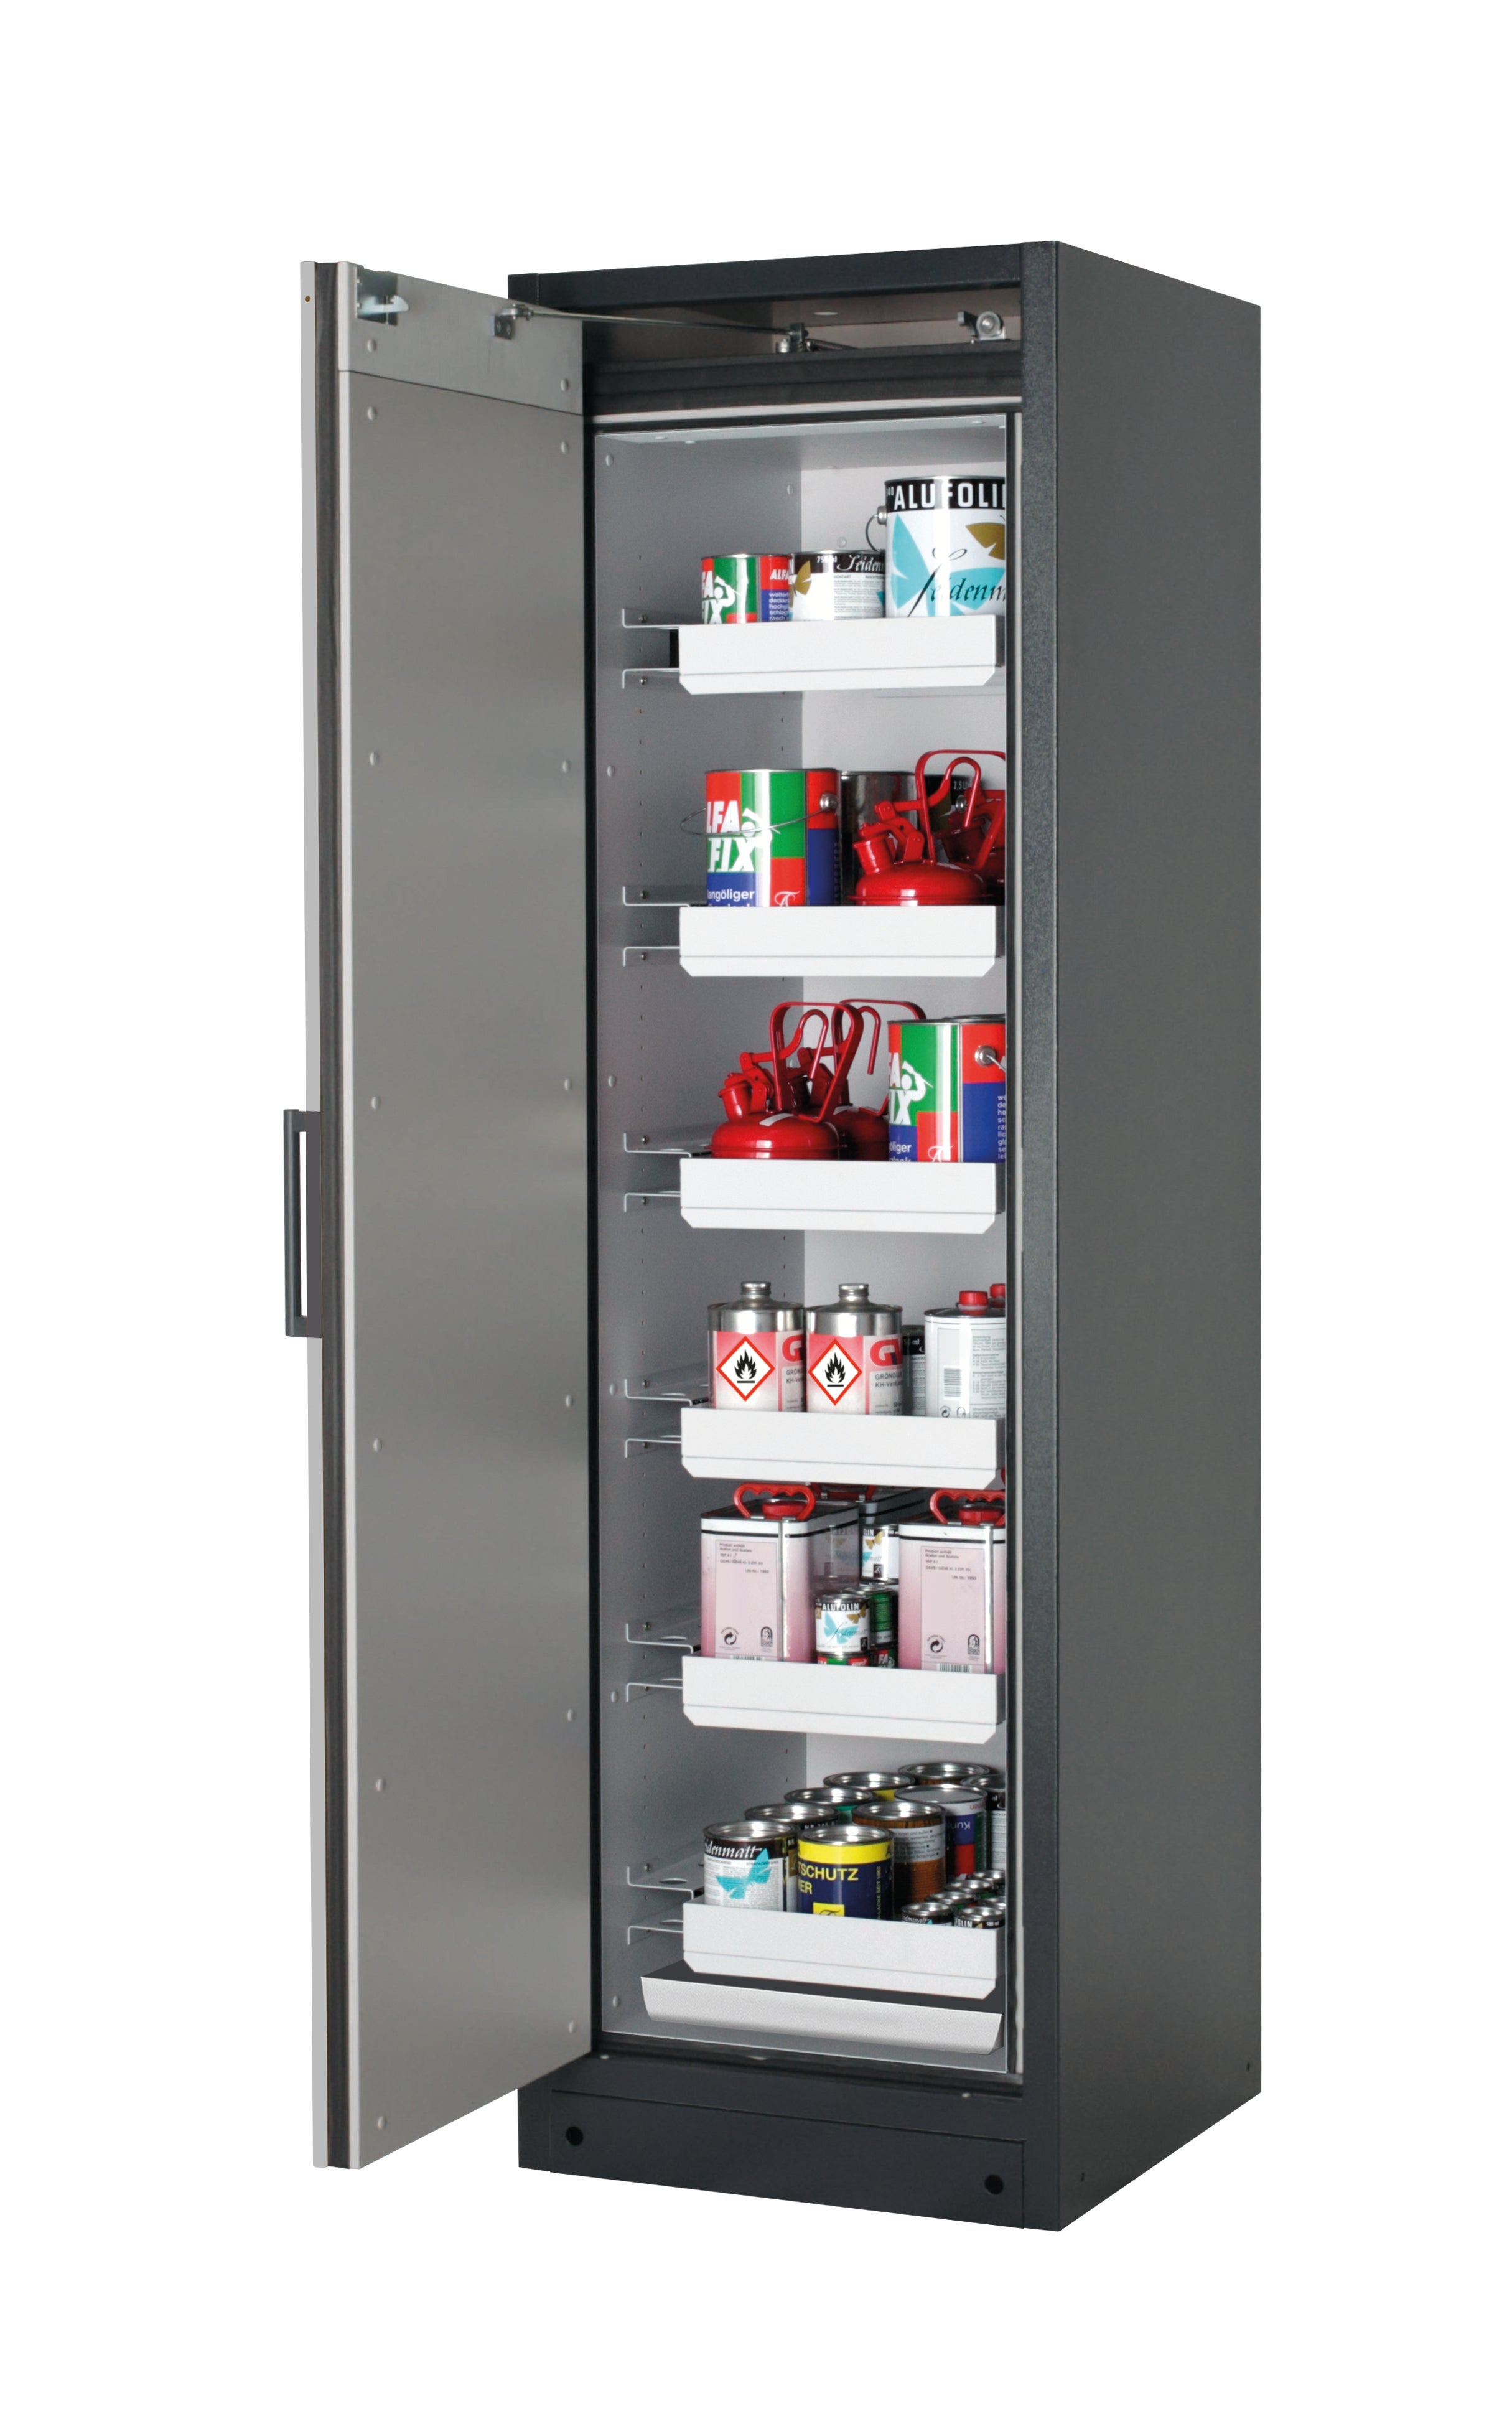 Type 90 safety storage cabinet Q-CLASSIC-90 model Q90.195.060 in asecos silver with 6x drawer (standard) (sheet steel),